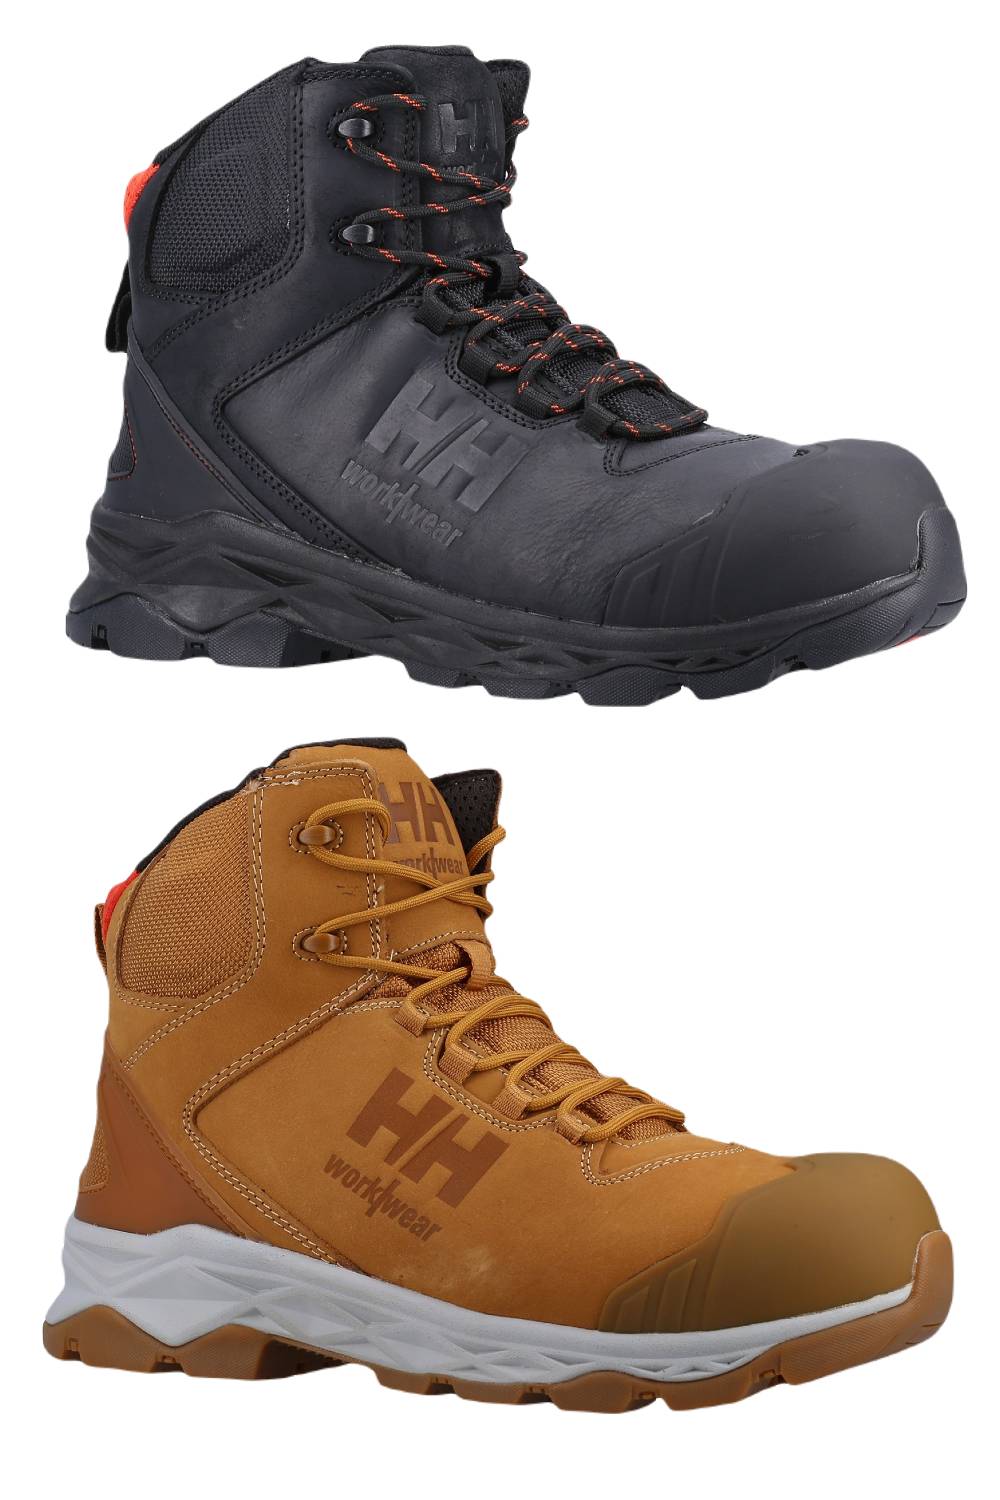 Helly Hansen Oxford Mid S3 Safety Boot in Black and New Wheat